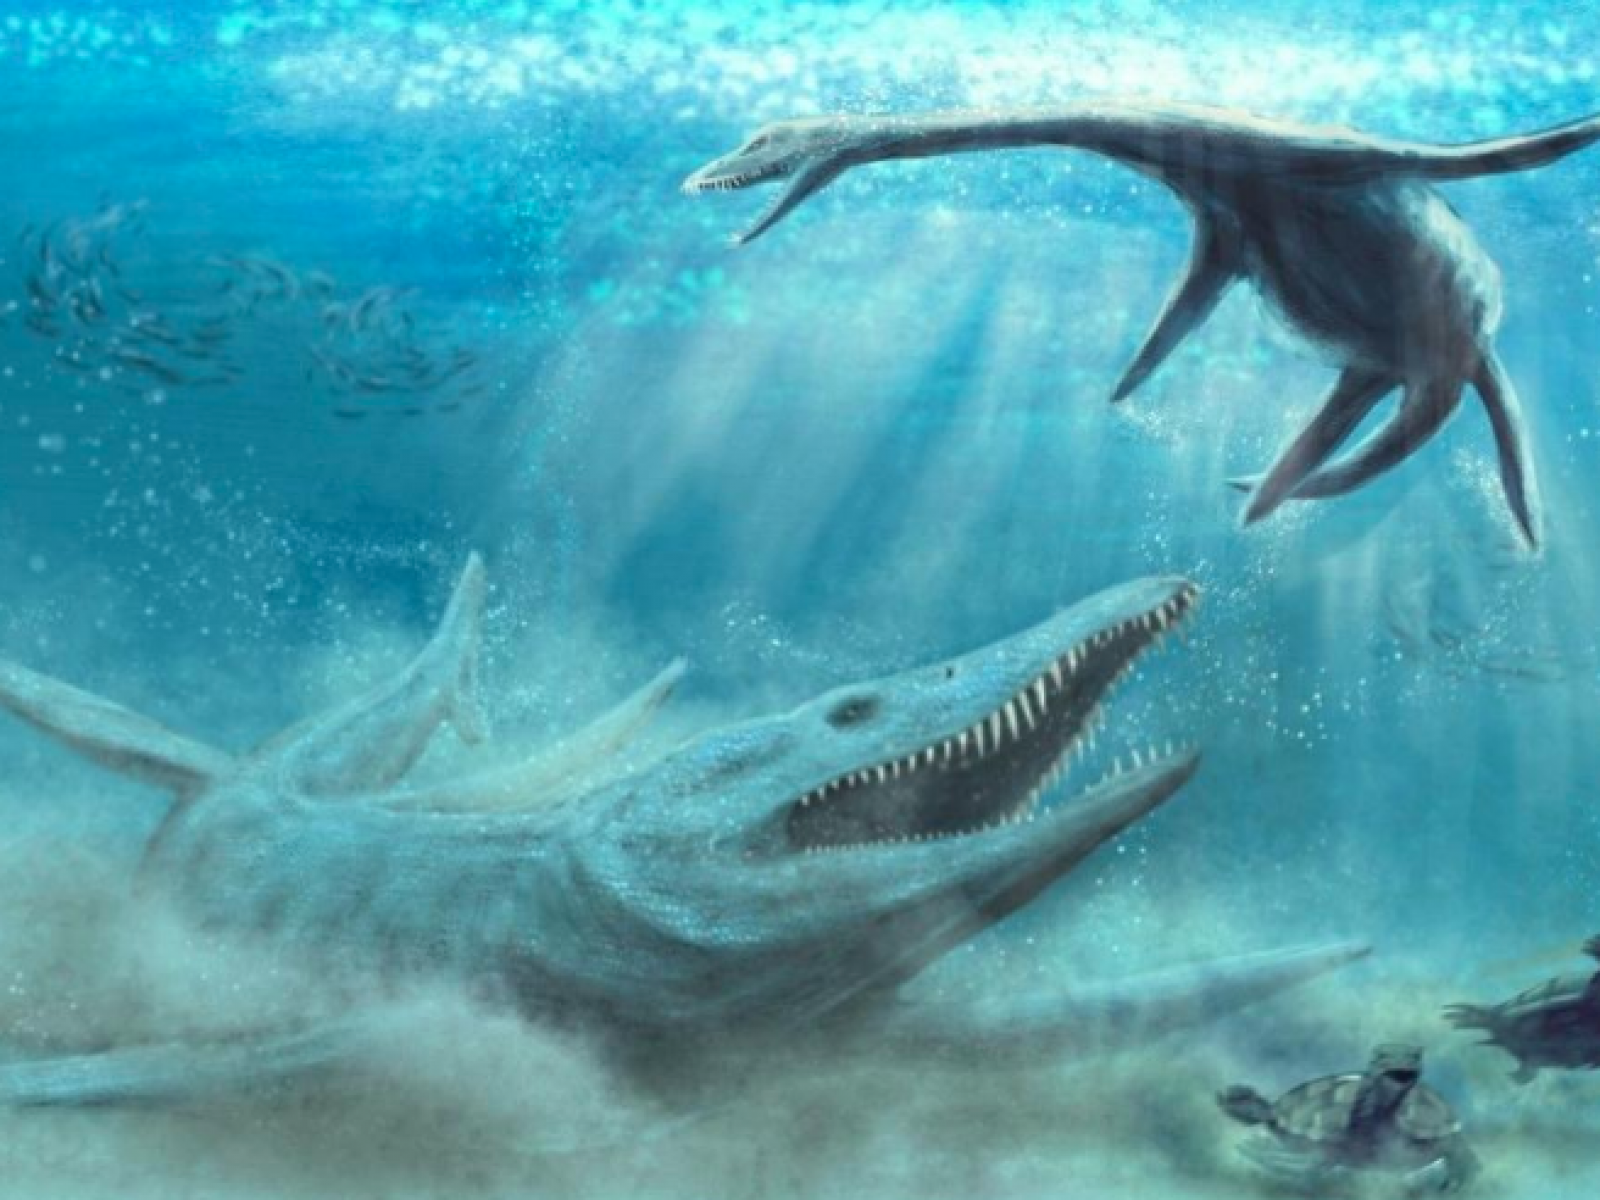 33-foot-long 'Sea Monster' That 'Hunted All Animals' Found Surrounded by  Ancient Crocodile Skulls and Teeth